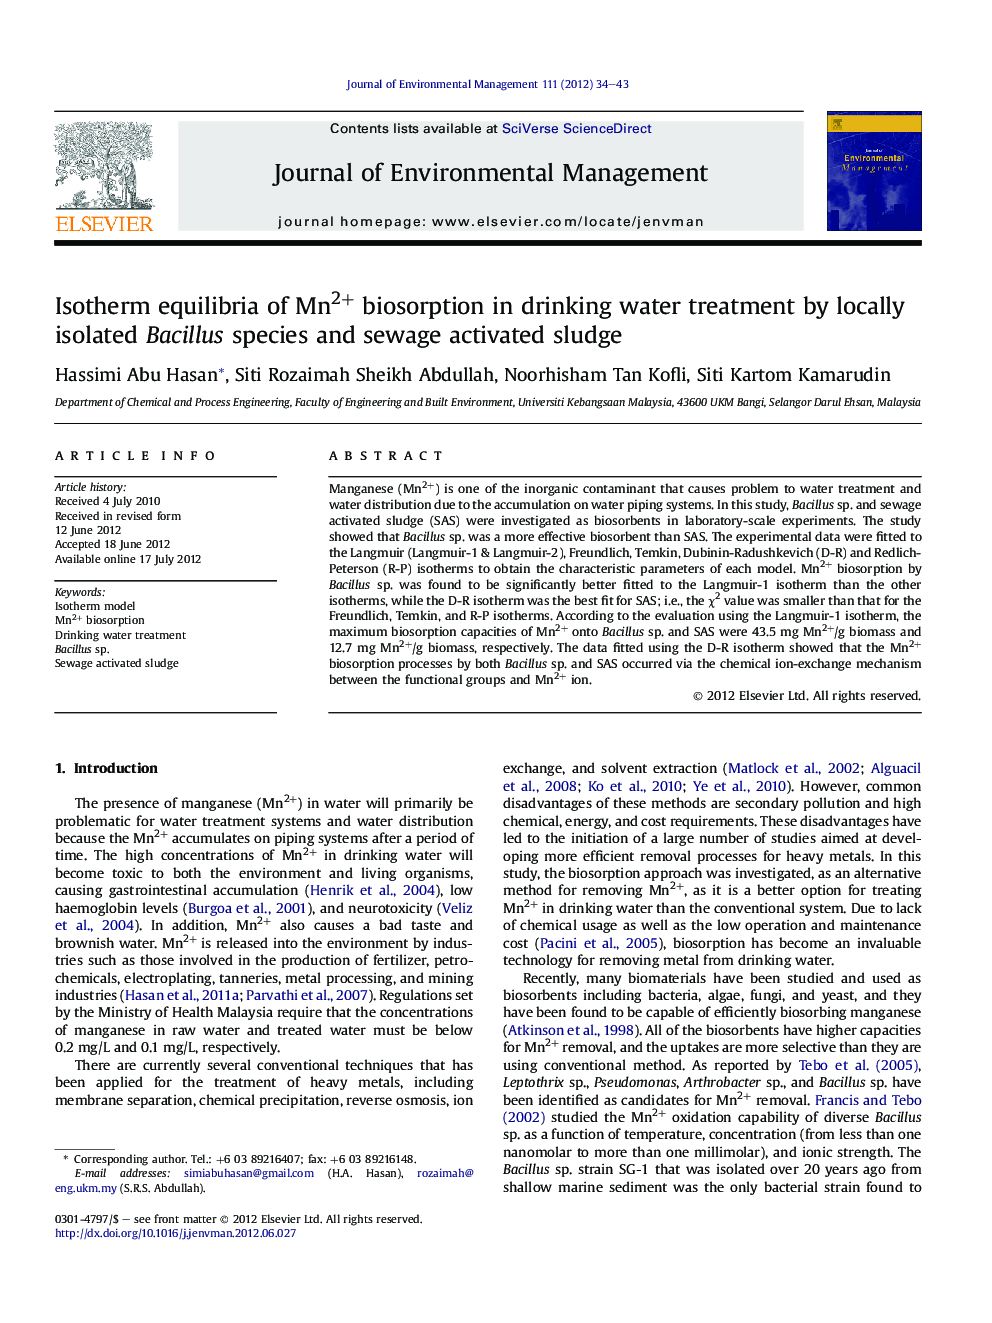 Isotherm equilibria of Mn2+ biosorption in drinking water treatment by locally isolated Bacillus species and sewage activated sludge